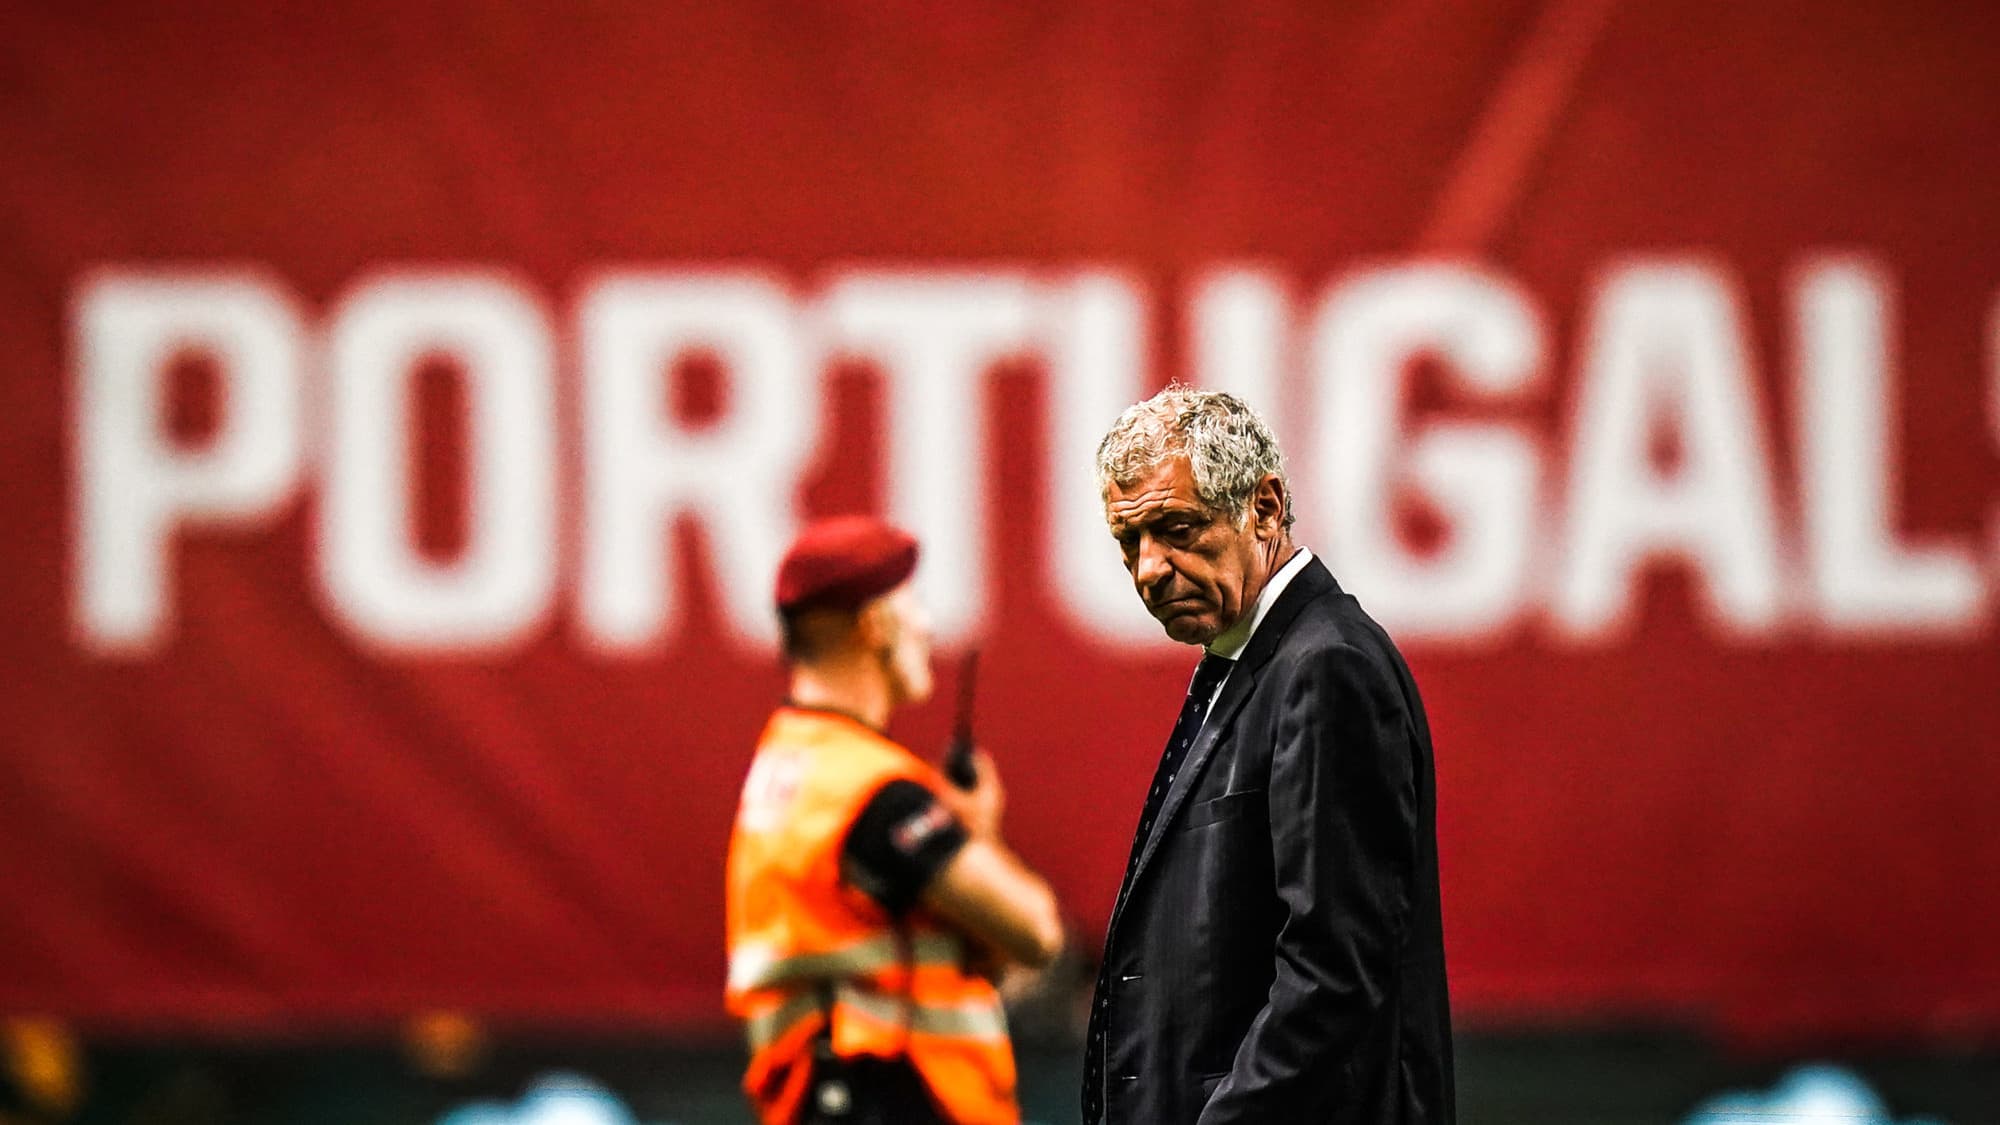 Fernando Santos will have to pay back the large sums collected from the tax authorities